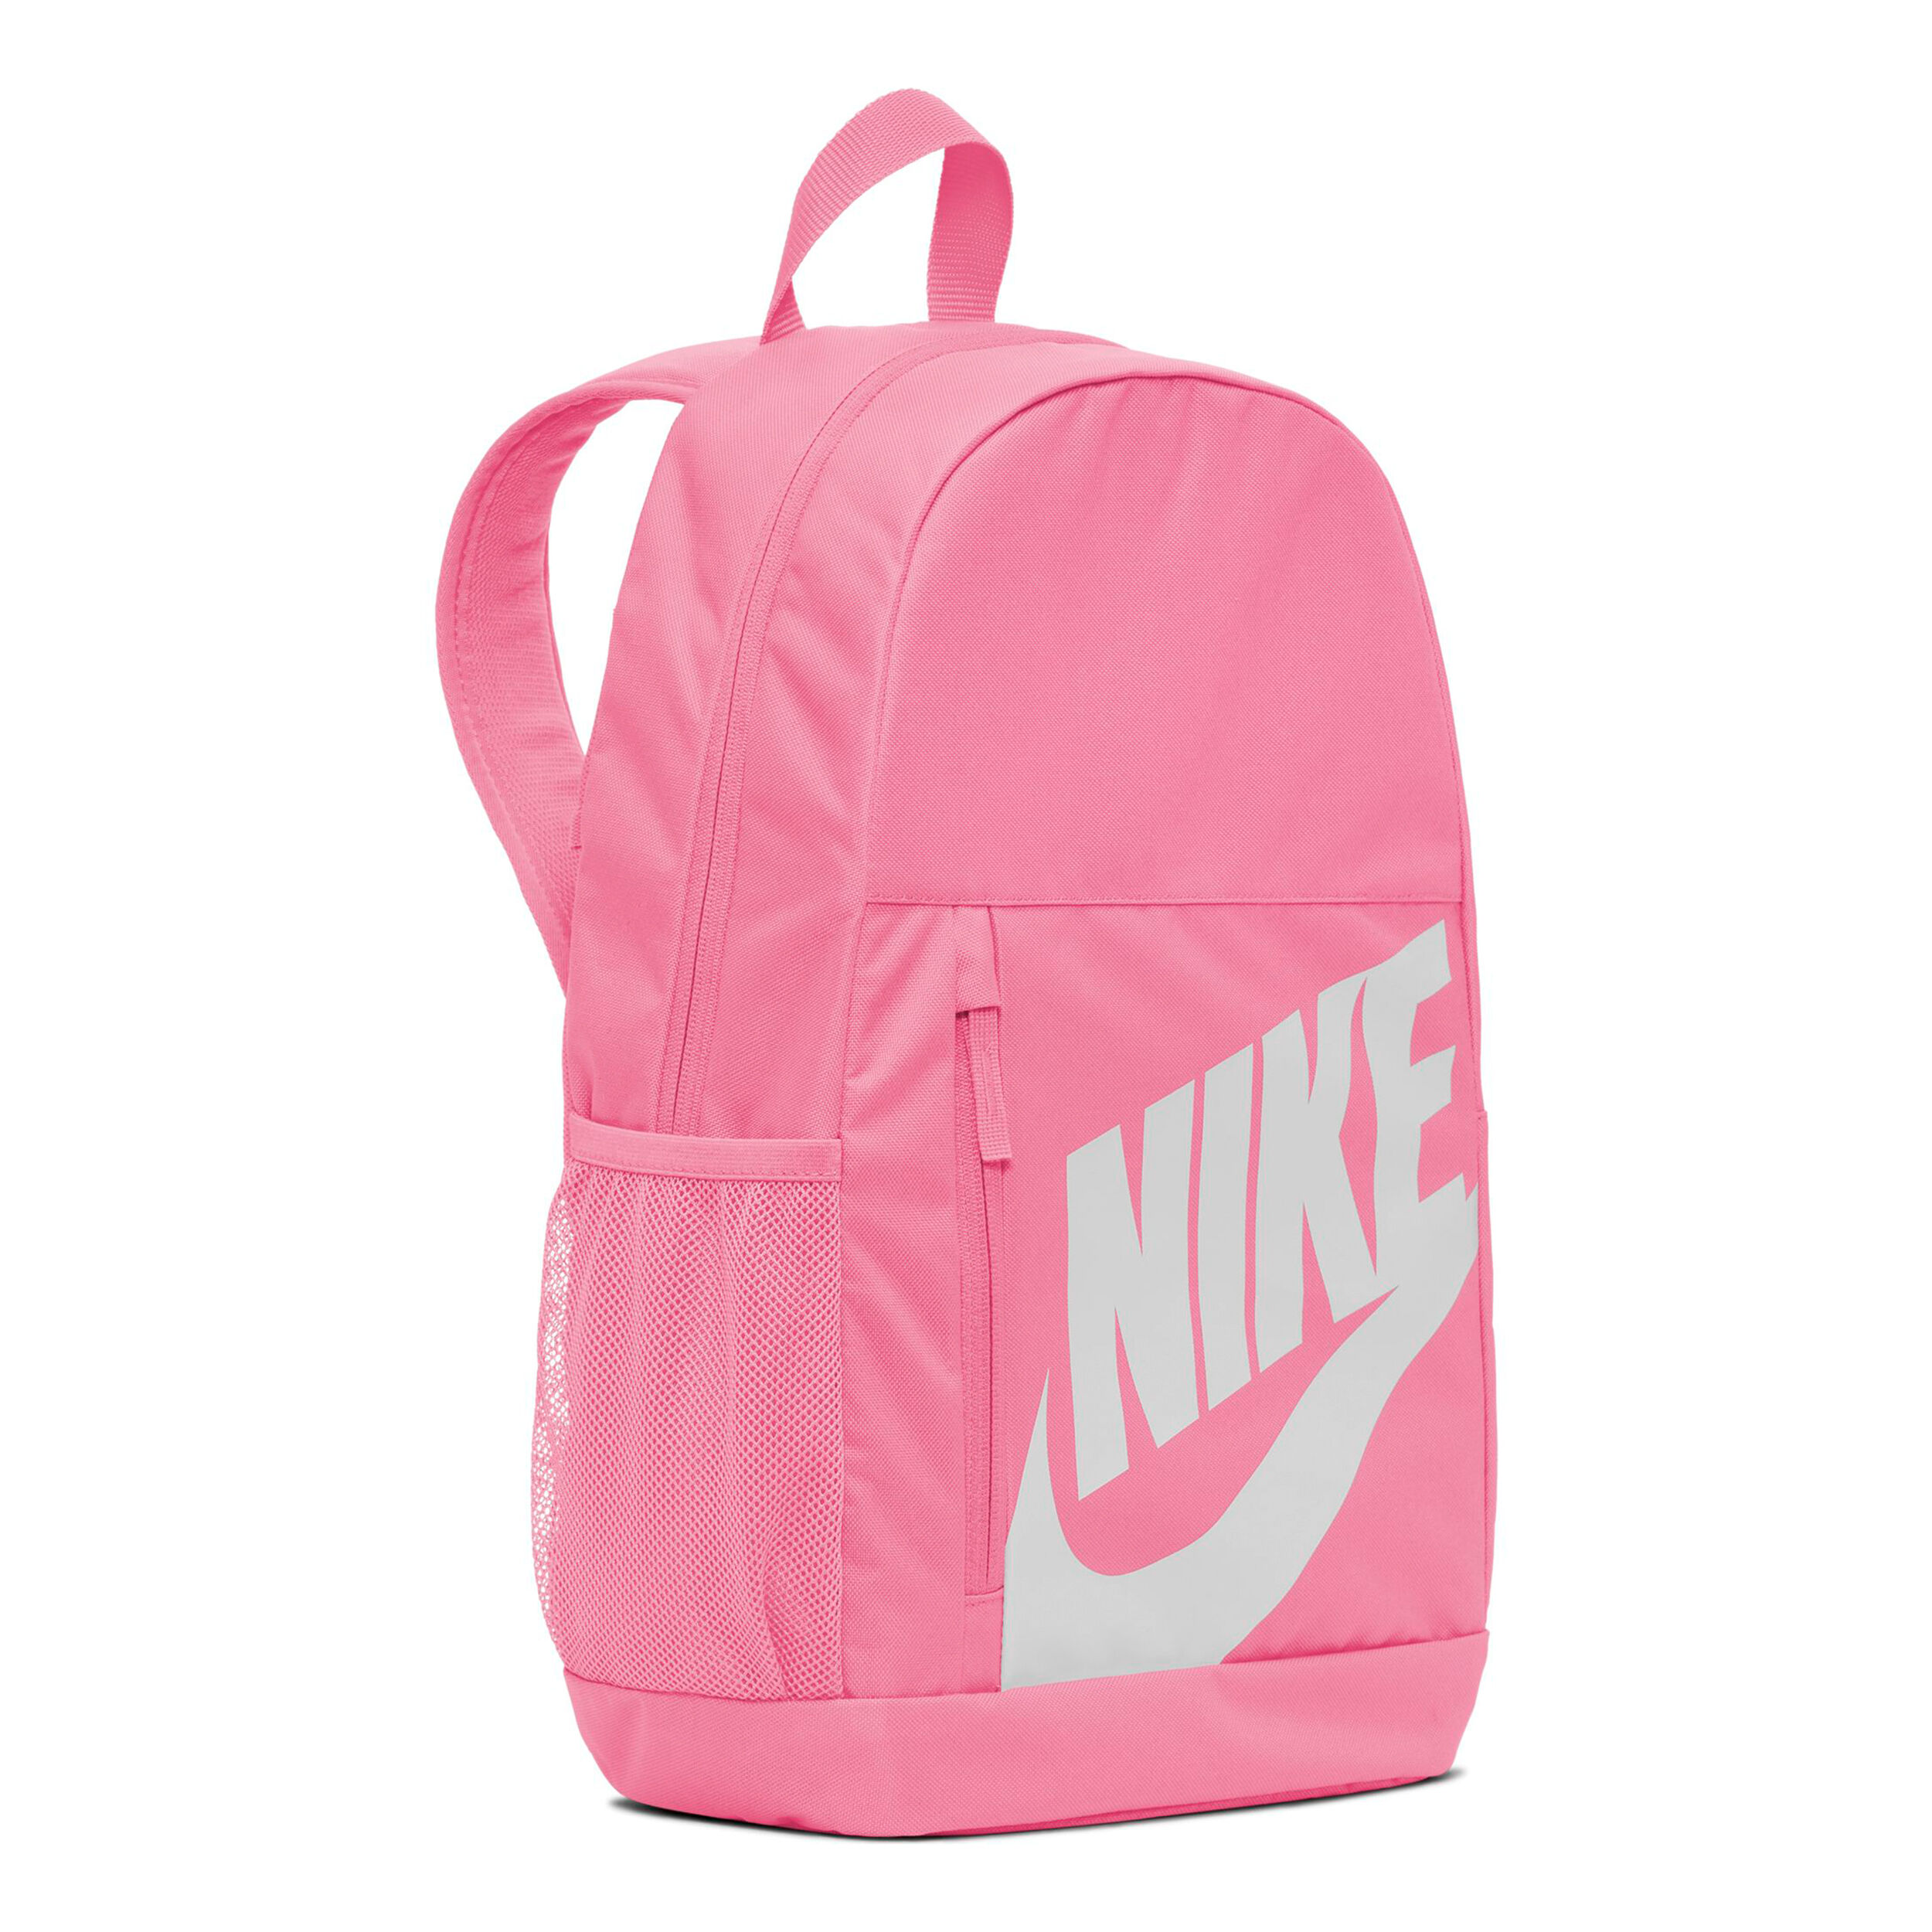 Nike Insulated Dome Lunch Box Tote School Bag Girls Pink New NWT | eBay